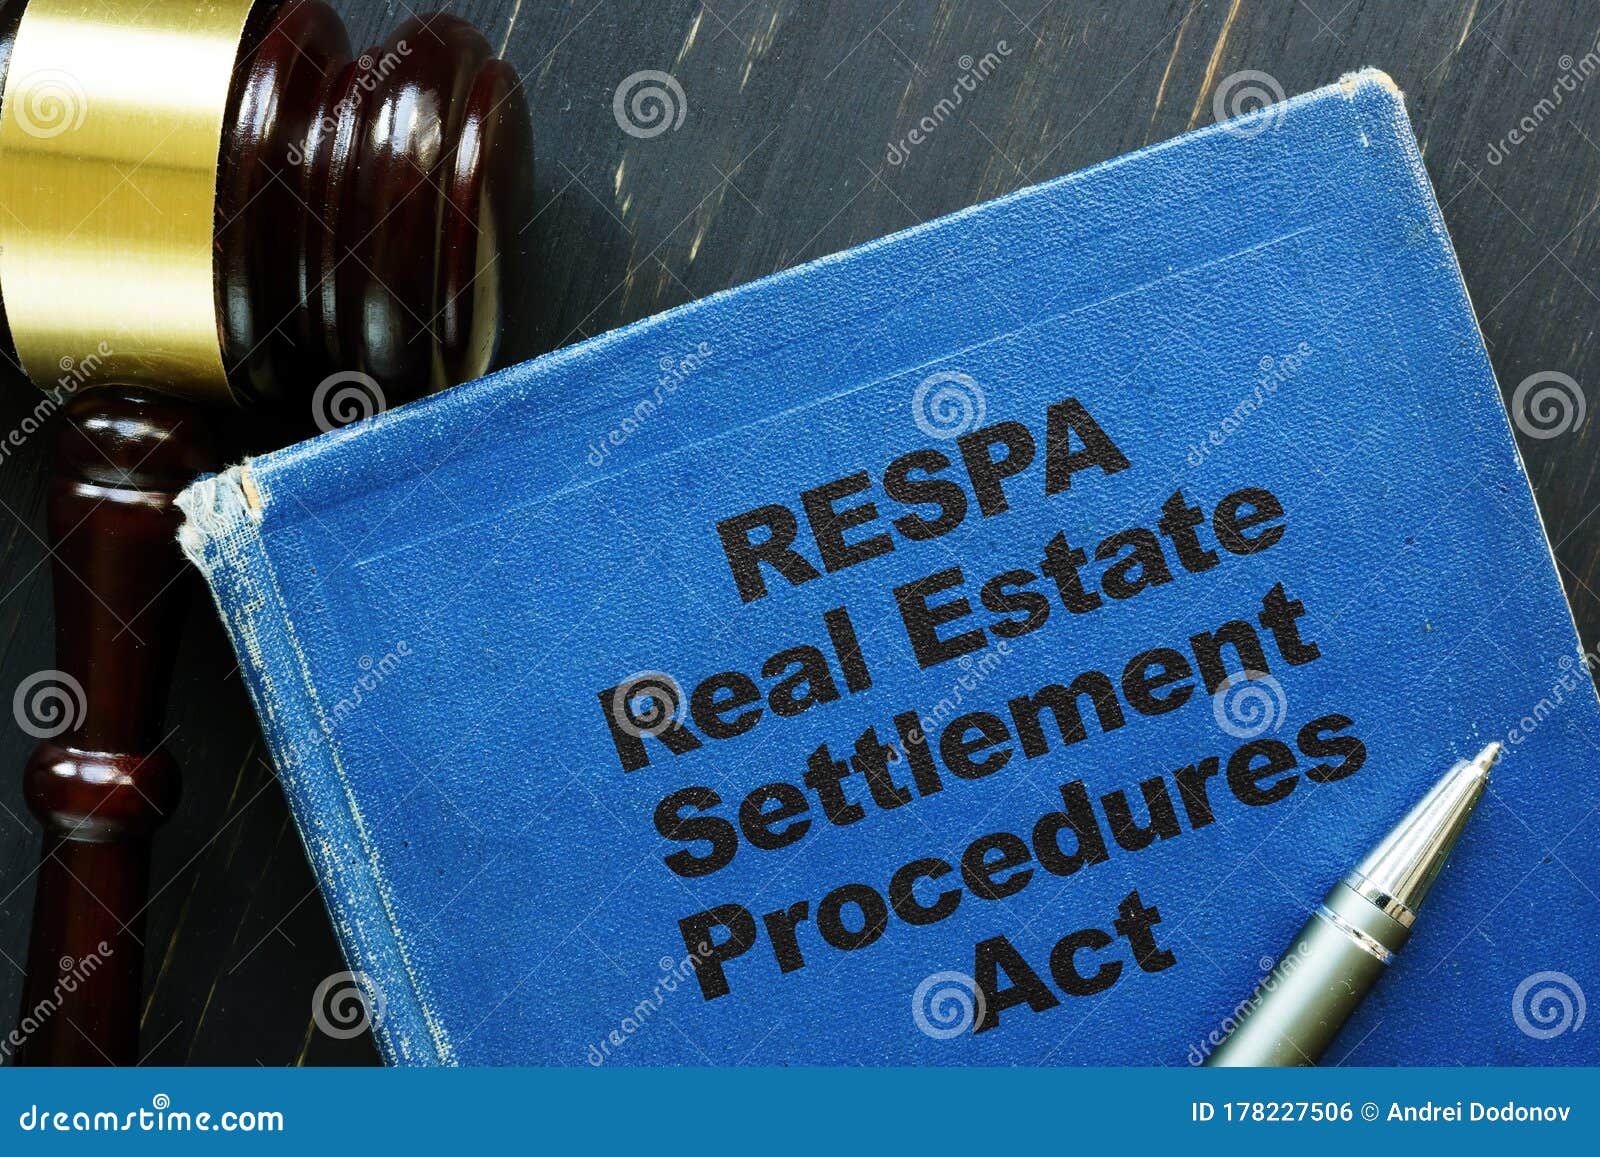 Why was the real estate settlement procedures act was enacted